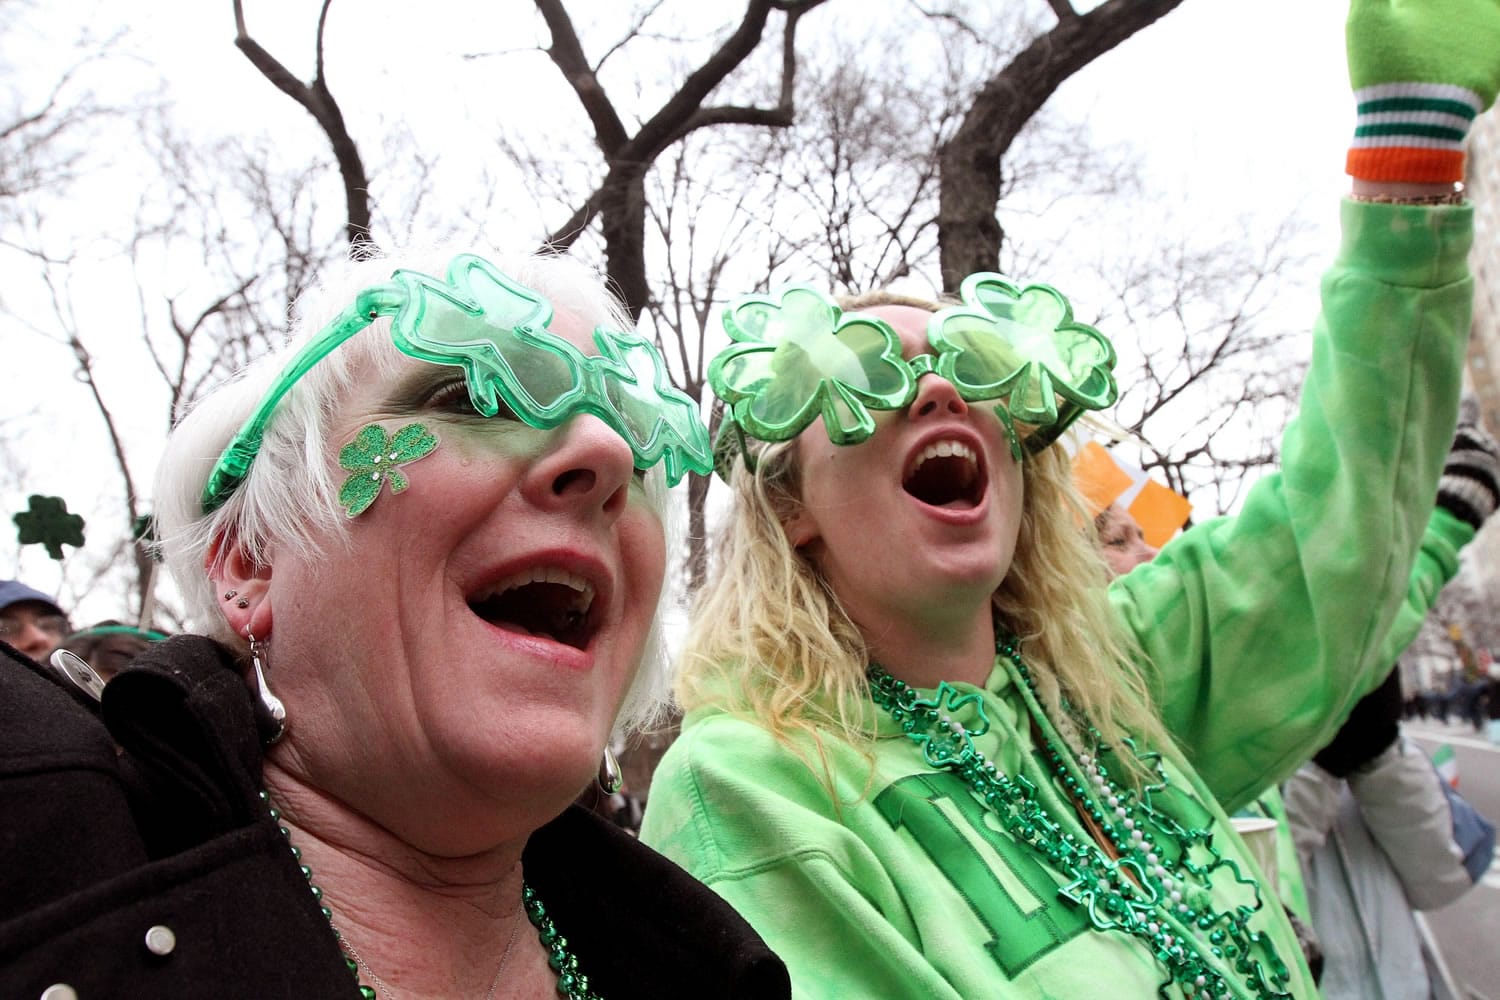 Kathy Brucia, of Bellmore, N.Y, left, and Kara Kerley, of Wantagh, N.Y., laugh Saturday as they watch the St.